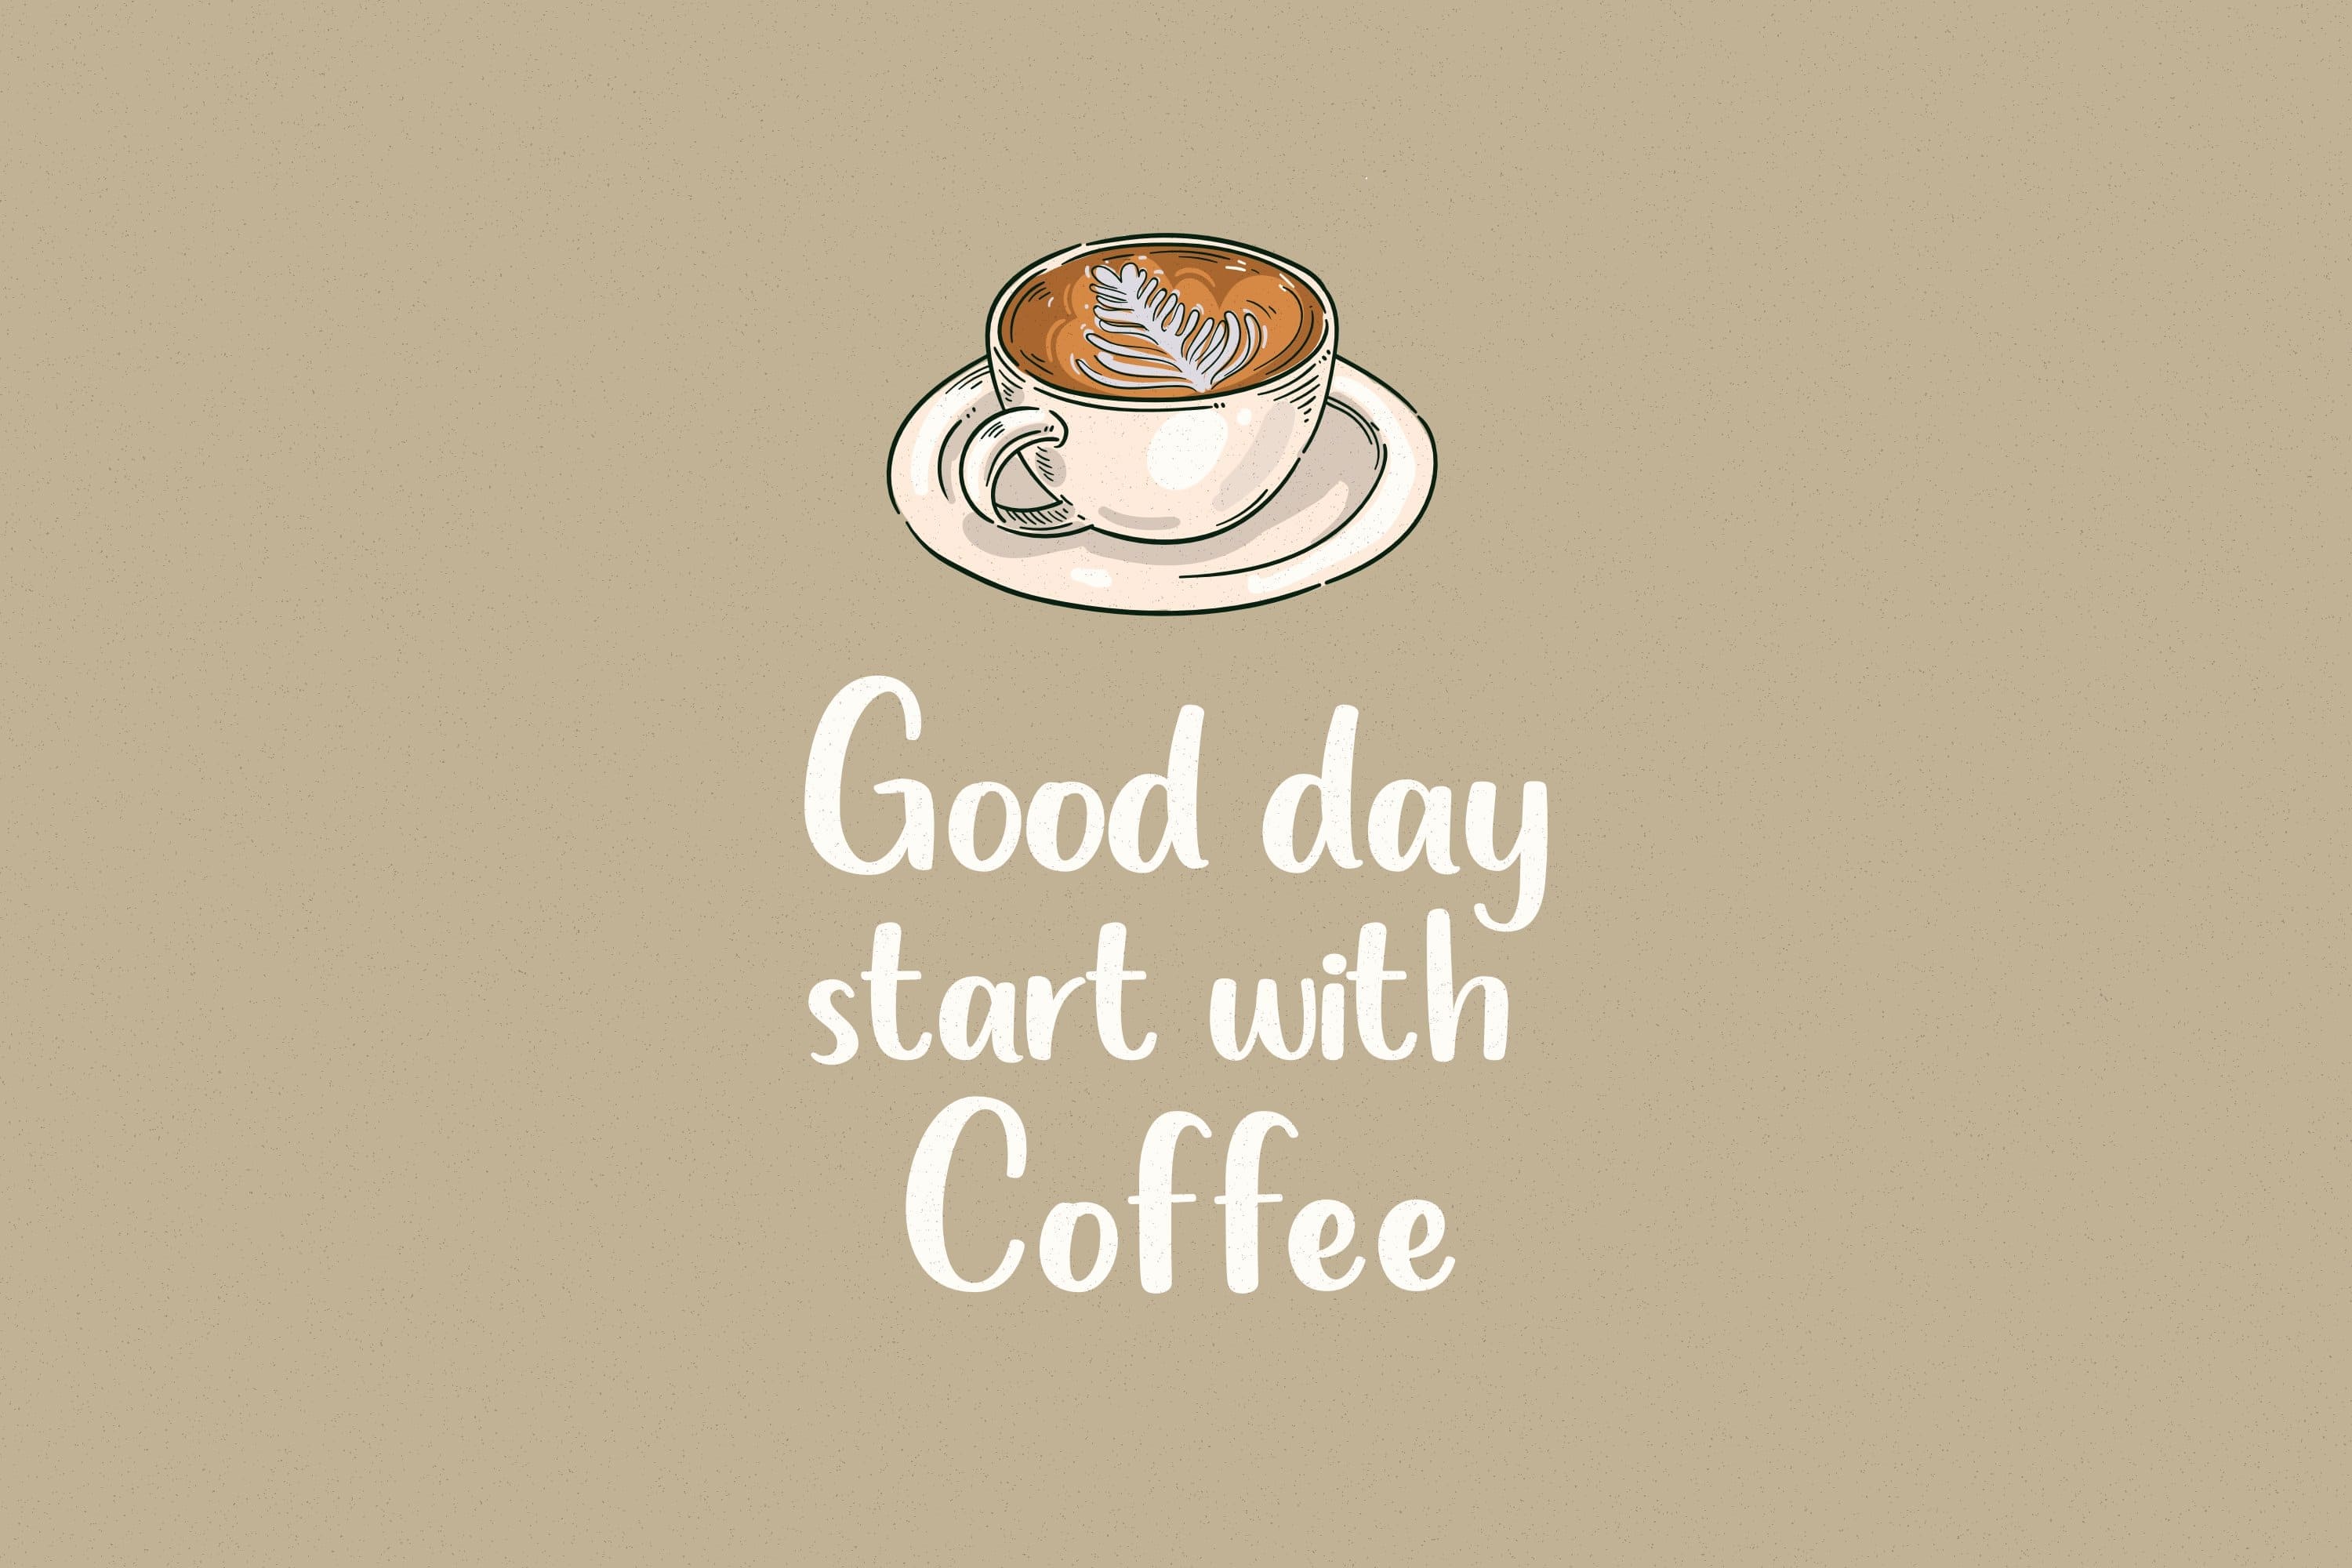 A cup of delicious coffee "Good day start with Cofee".